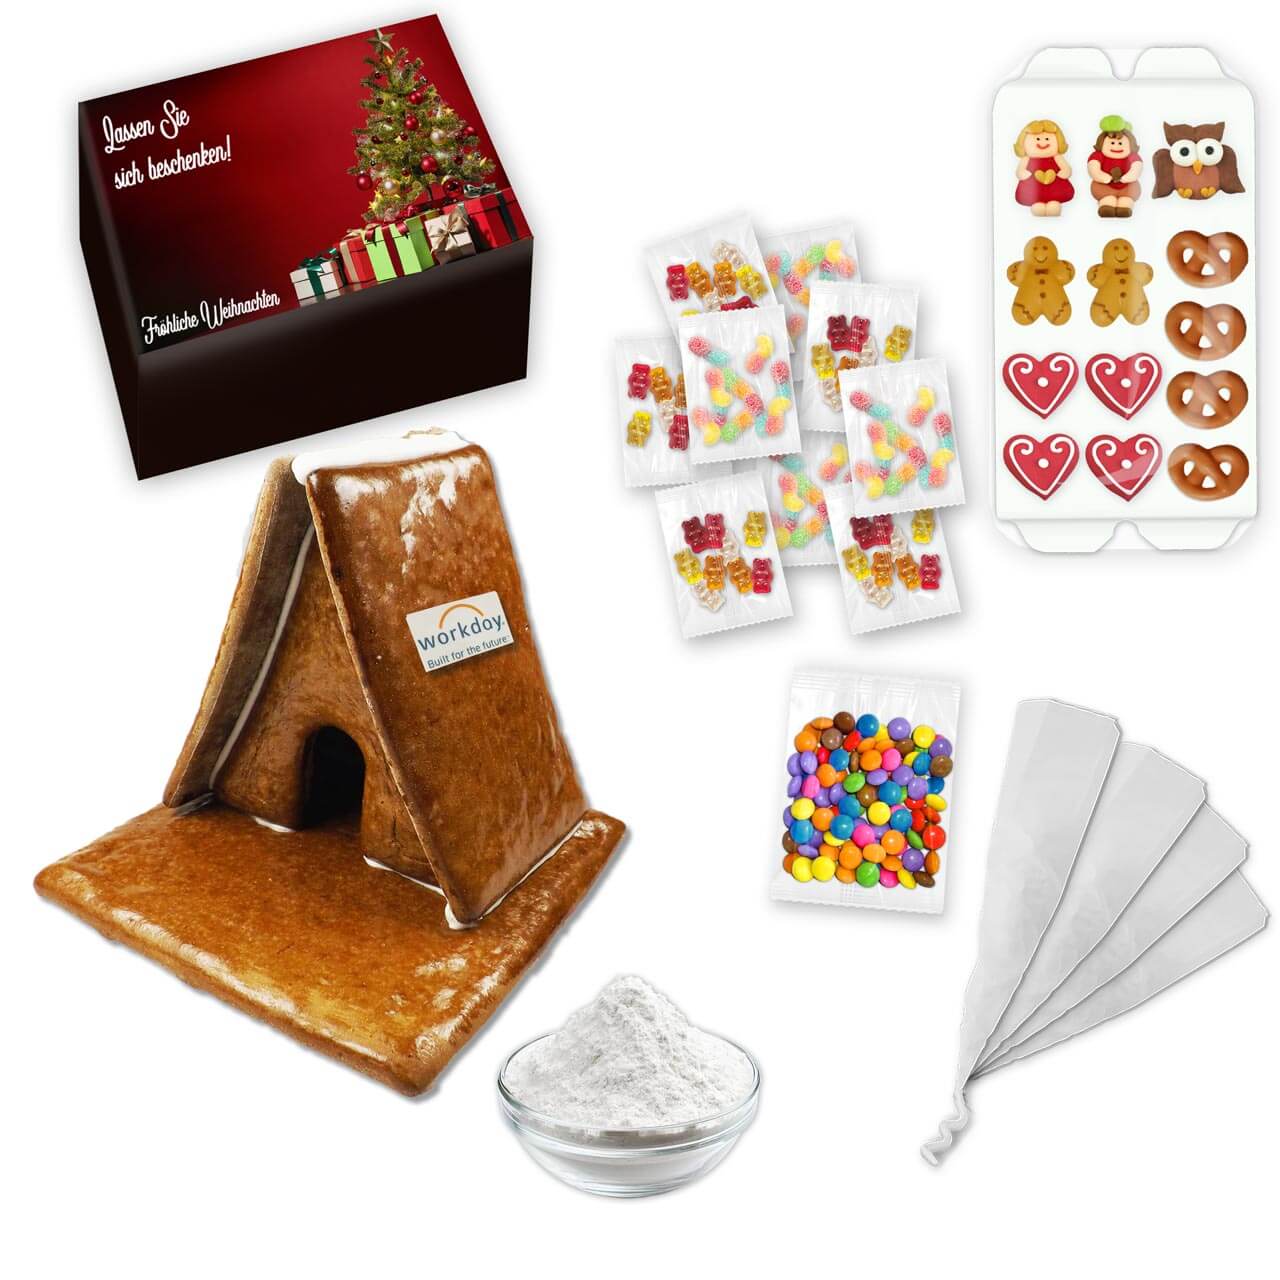 Hexenhaus L to build yourself in a printed gift box - with decoration and accessories